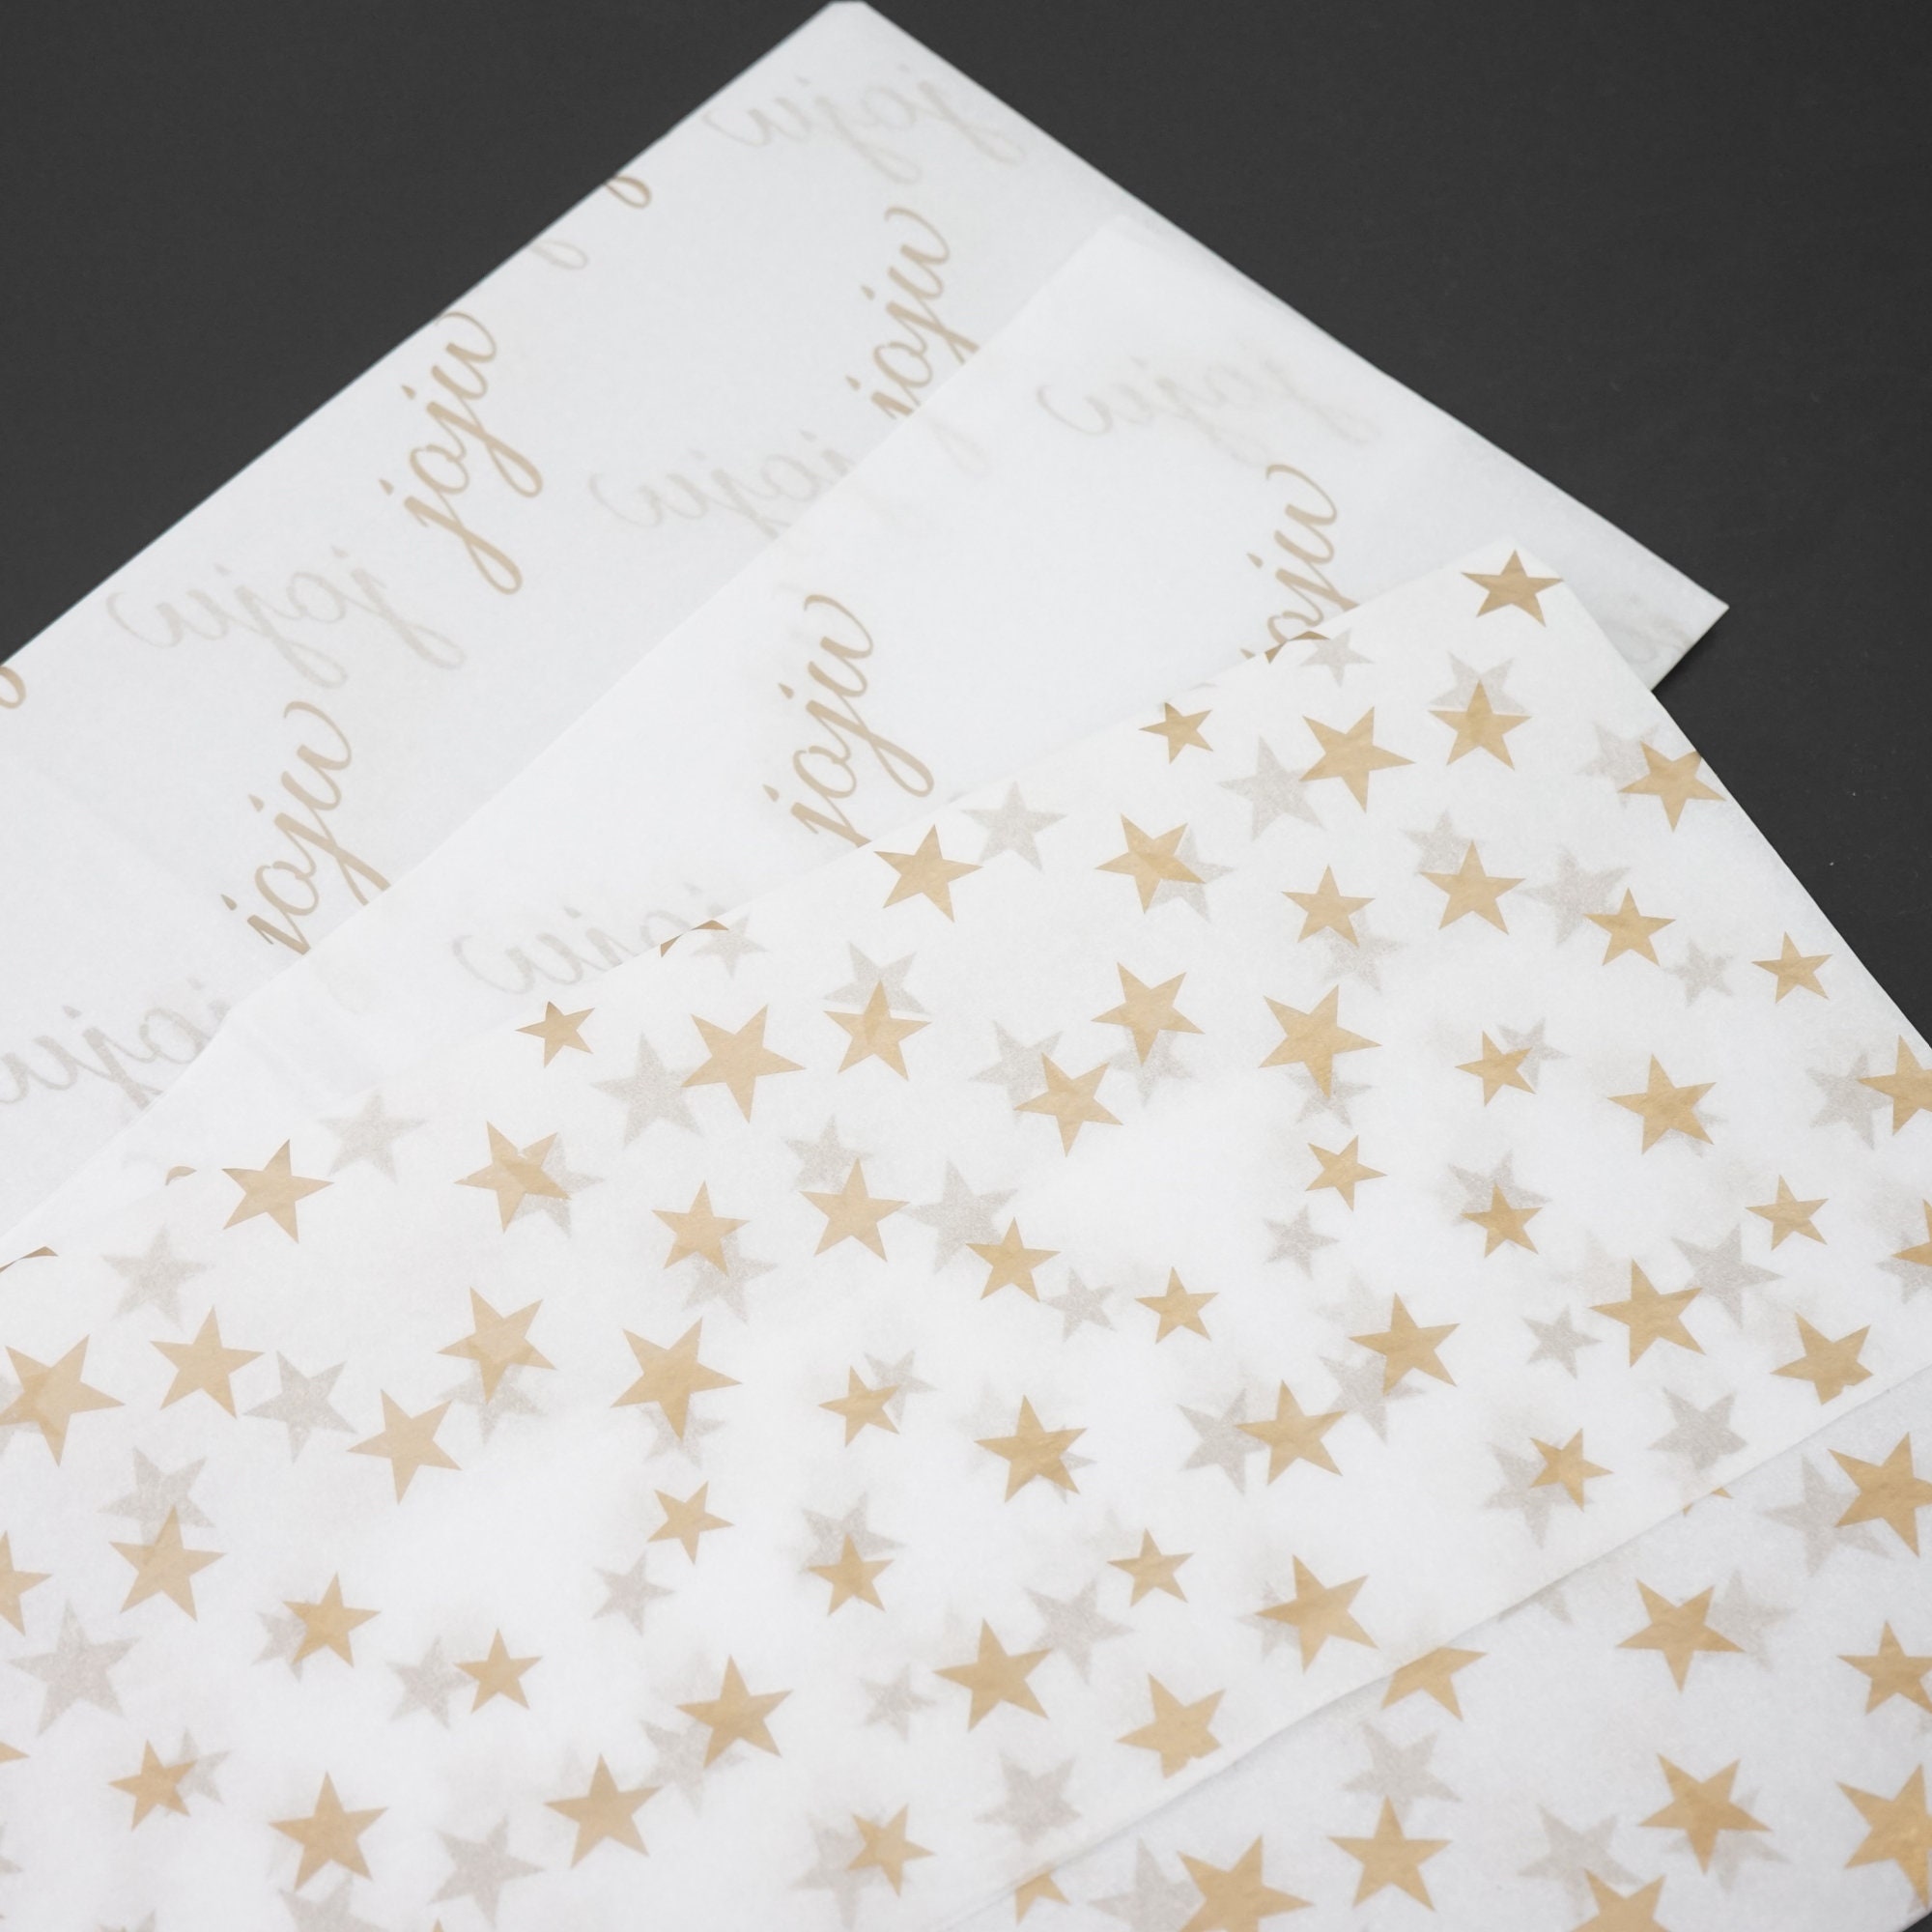 Gold+Star+Patterned+Tissue+Paper+from+Midpac+Packaging.+White+Tissue+Paper+with+a+gold+star+print+across+the+sheet.